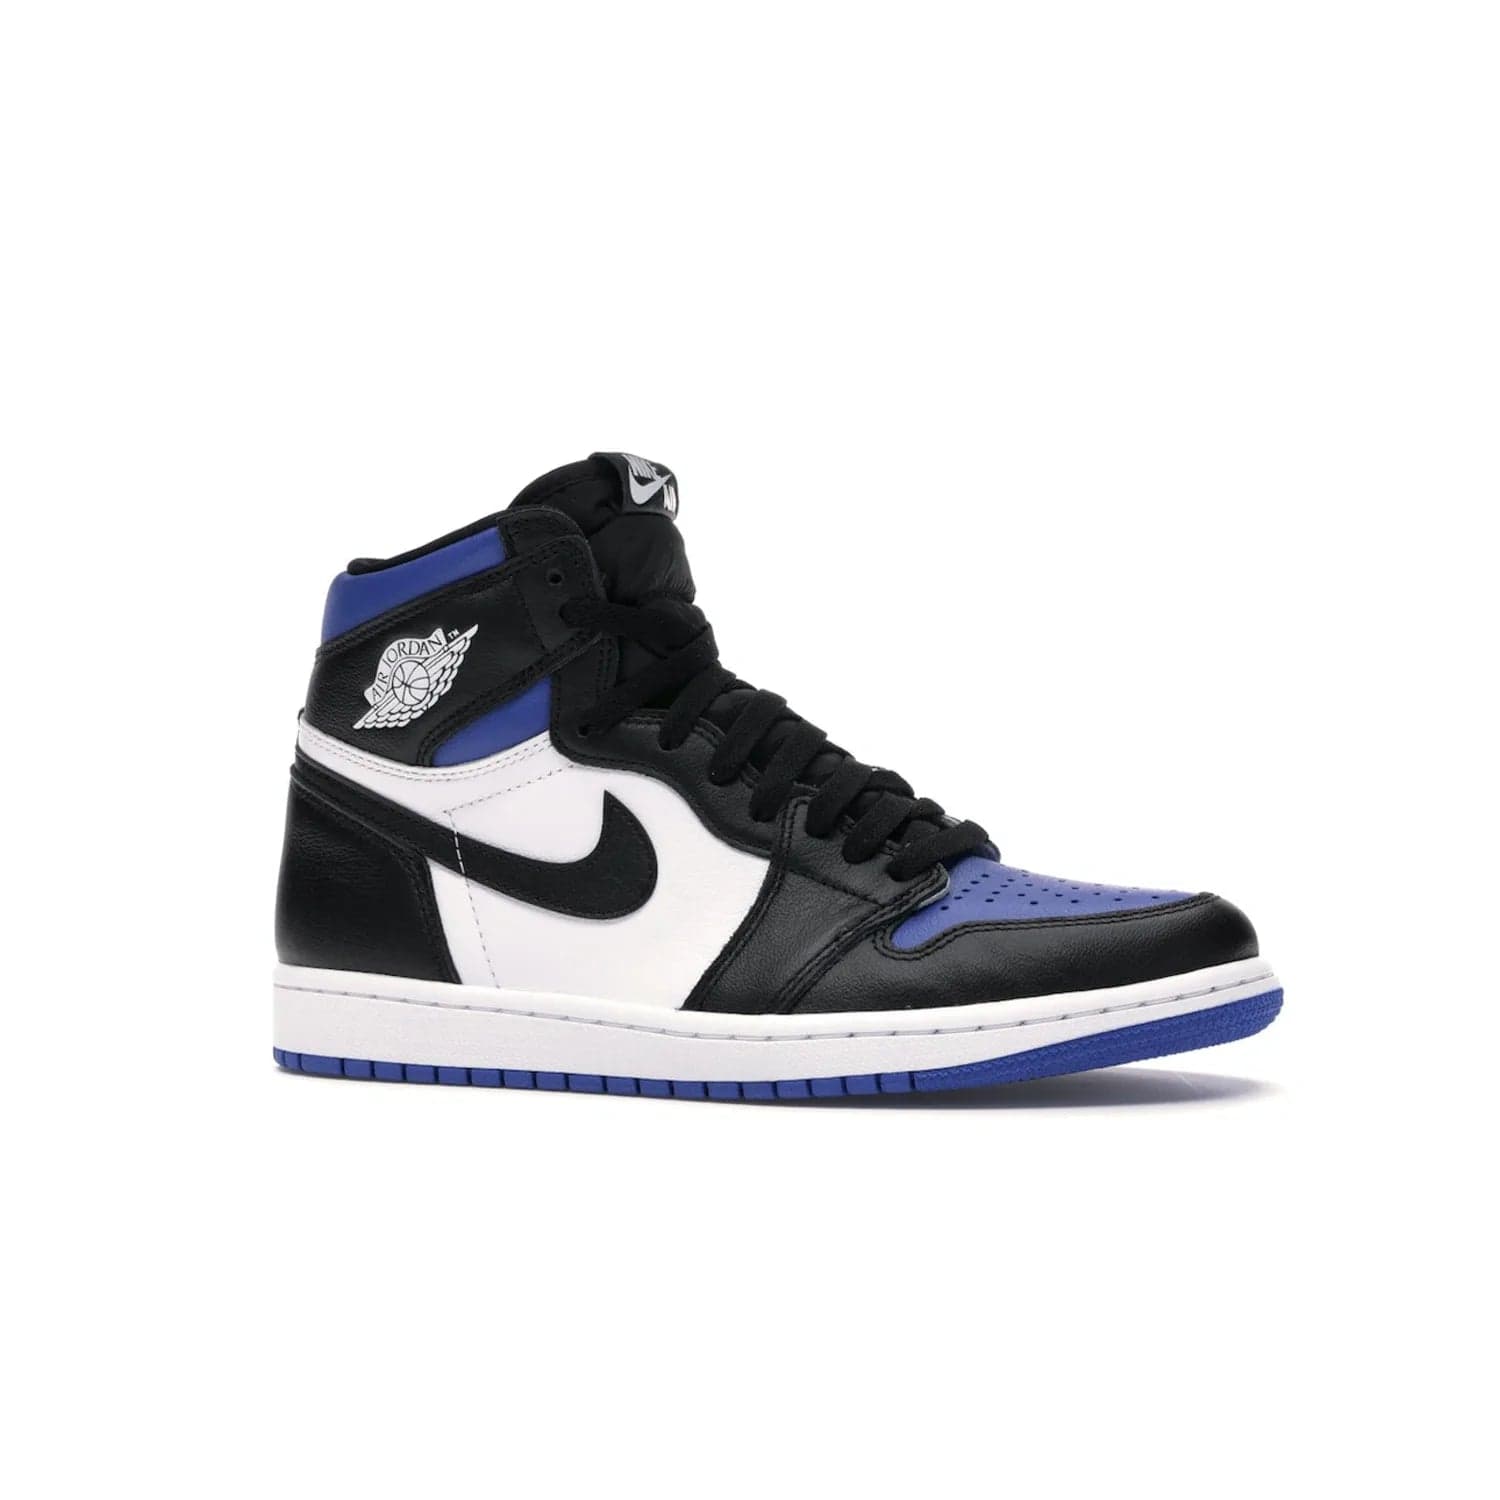 Jordan 1 Retro High Royal Toe - Image 3 - Only at www.BallersClubKickz.com - Refresh your look with the Jordan 1 Retro High Royal Toe. This classic AJ 1 sports a white and royal leather upper, black leather overlays, and branded leather tongue tag. Pick up today and set the streets ablaze.